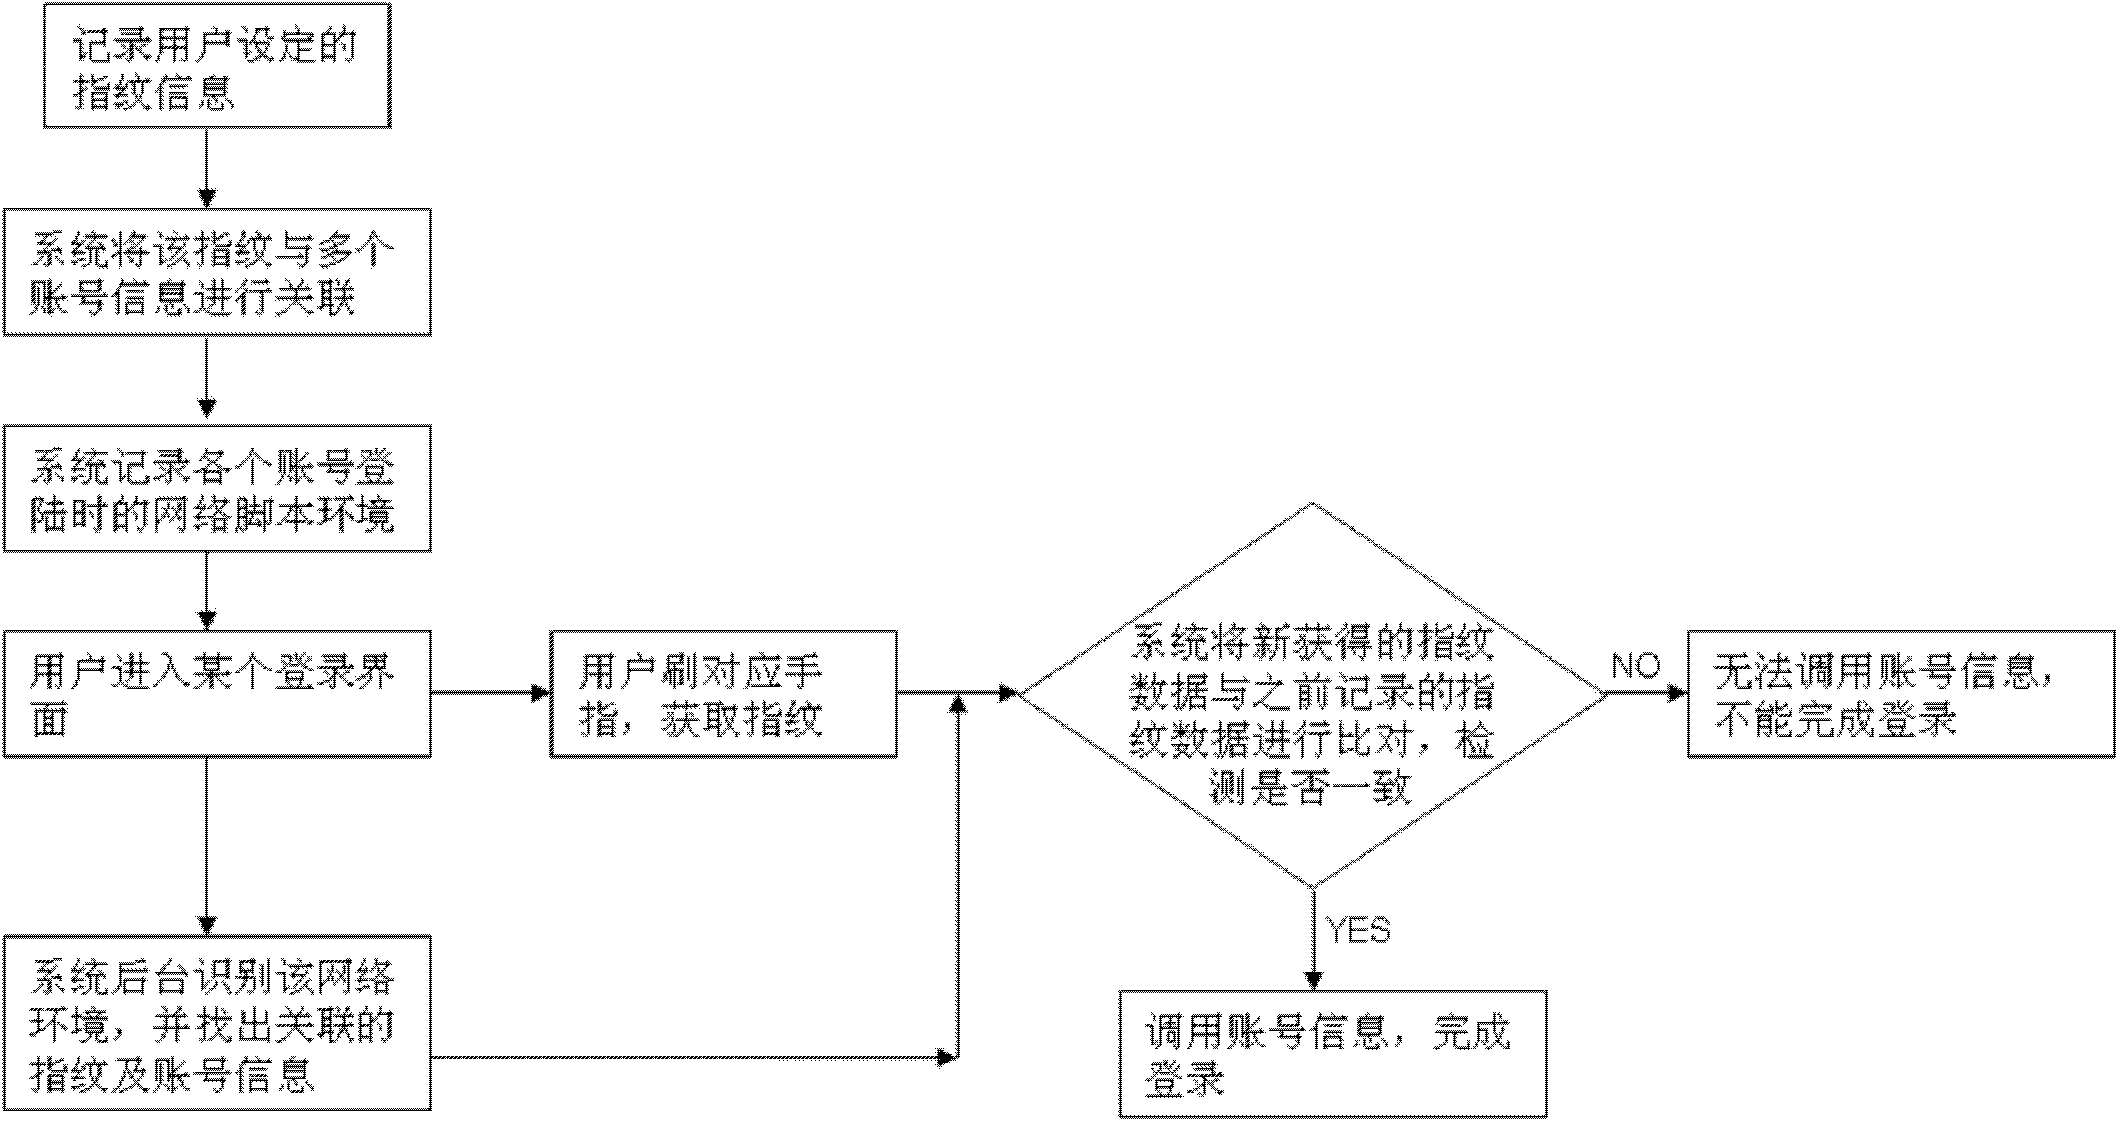 Method for authenticating account by using fingerprint identification